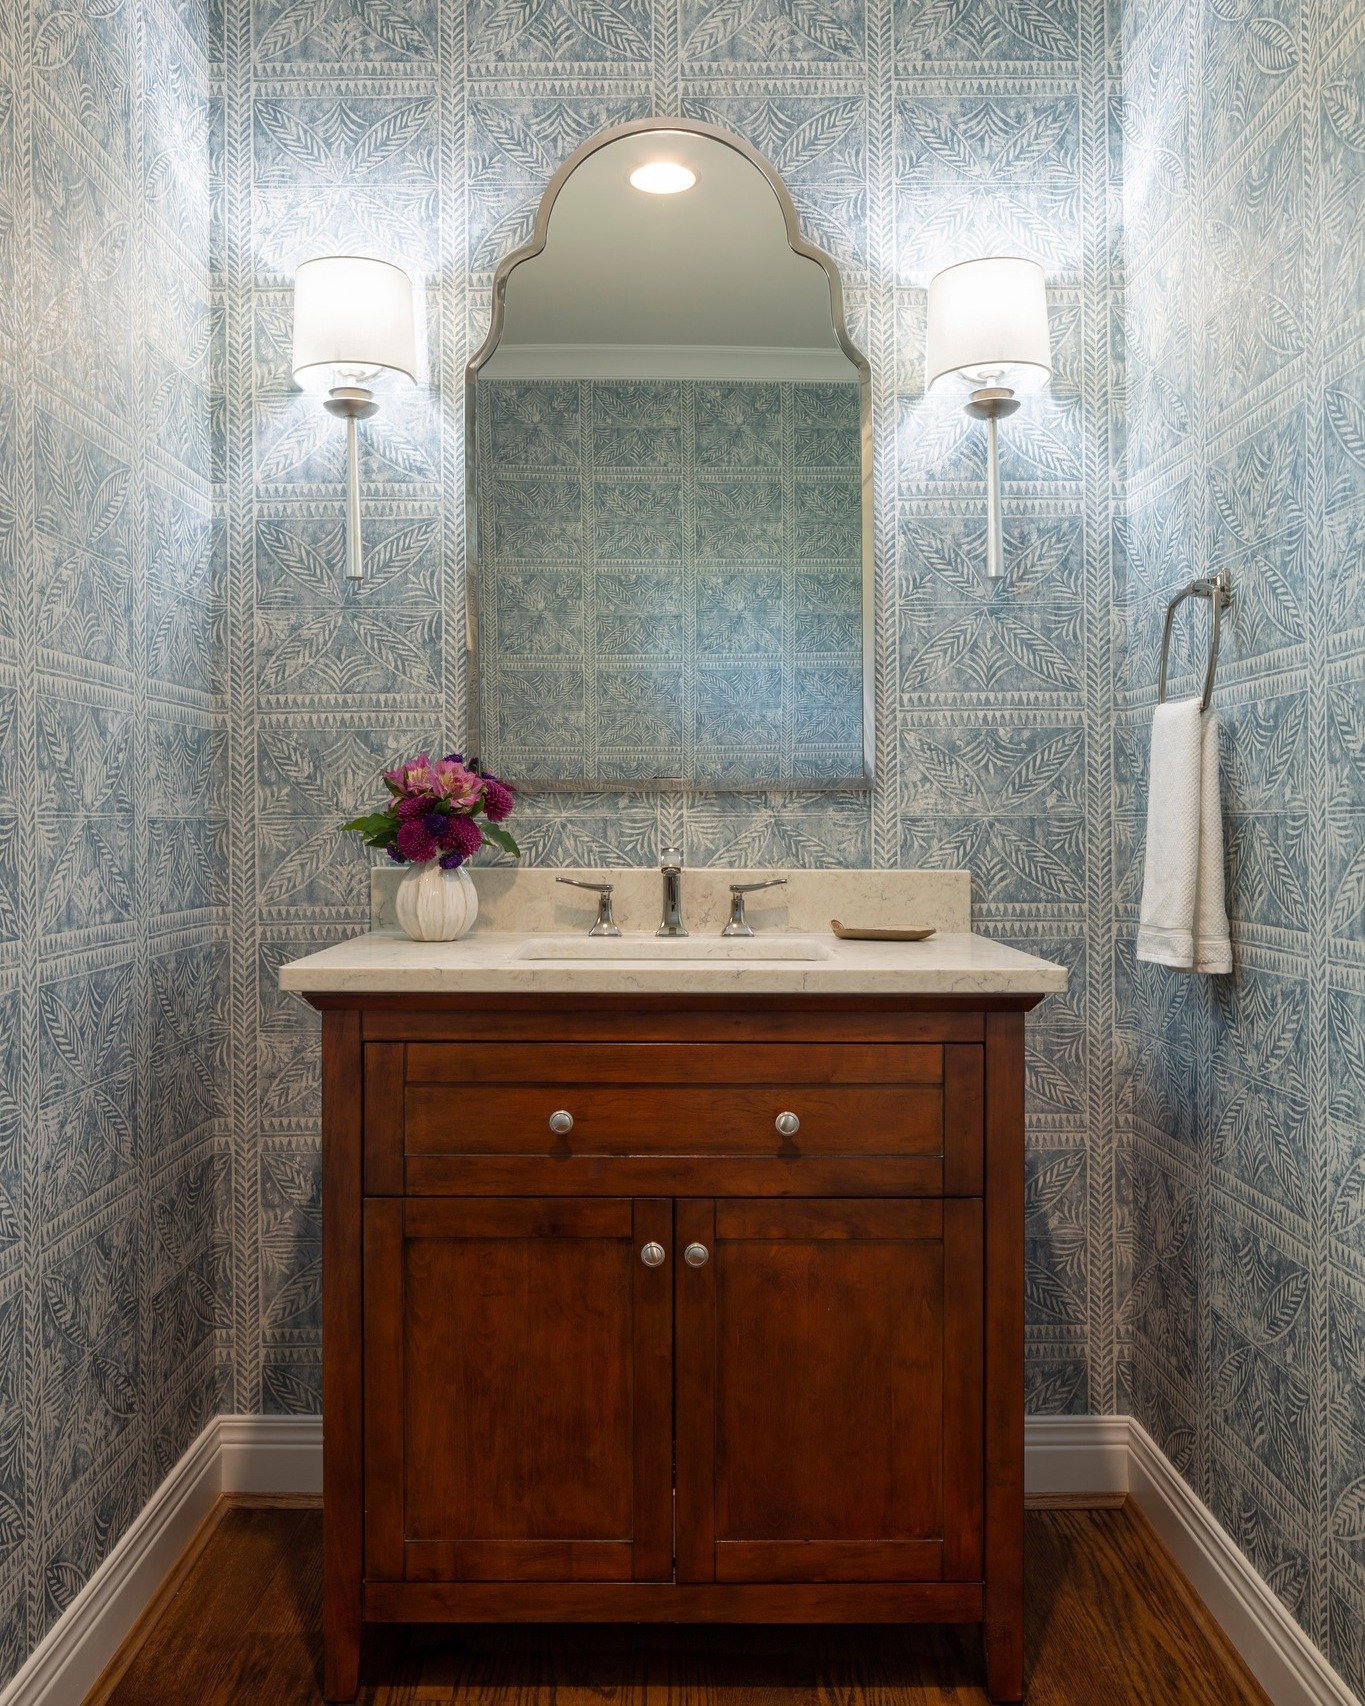 They say wallpaper is coming back in style... but for me, it never went out! Powder rooms pack more of a punch when there&rsquo;s personality on every wall. @thibaut_1886  #Wallpaper #PowderRoom 

 #interiordesign #vanity #hydeparkohio #cincinnati #o